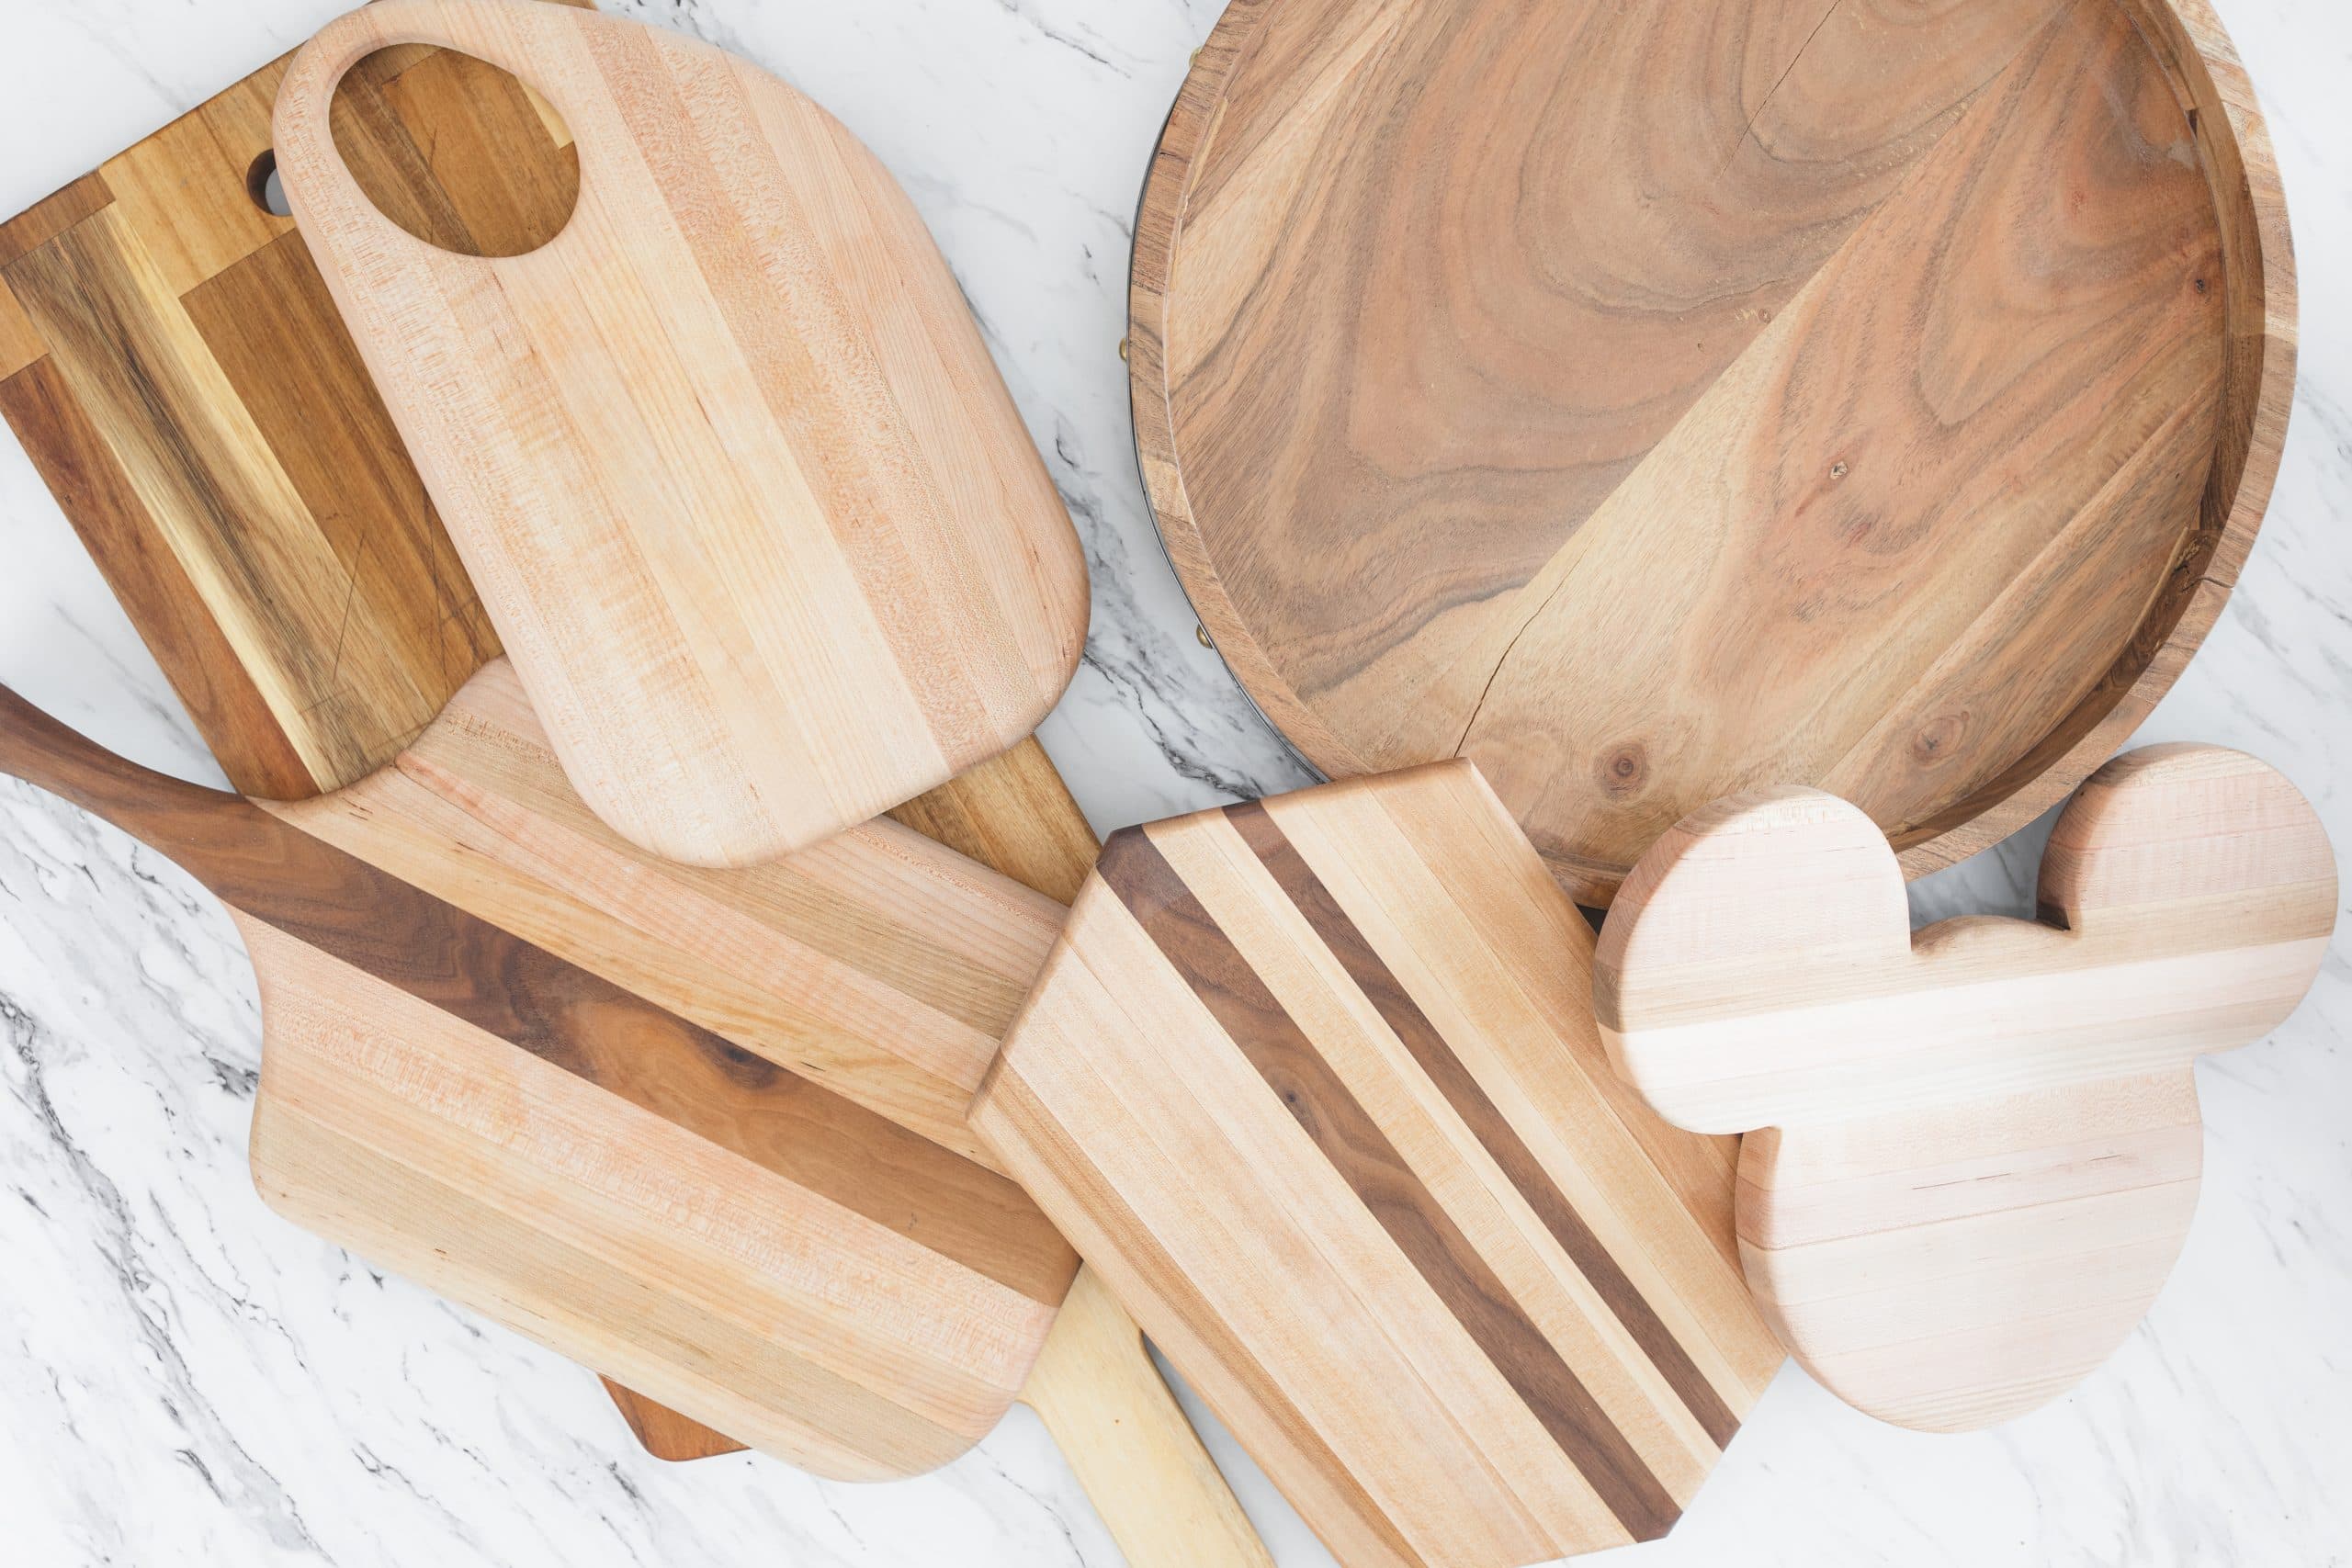 Wooden Cutting Boards for Charcuterie Boards